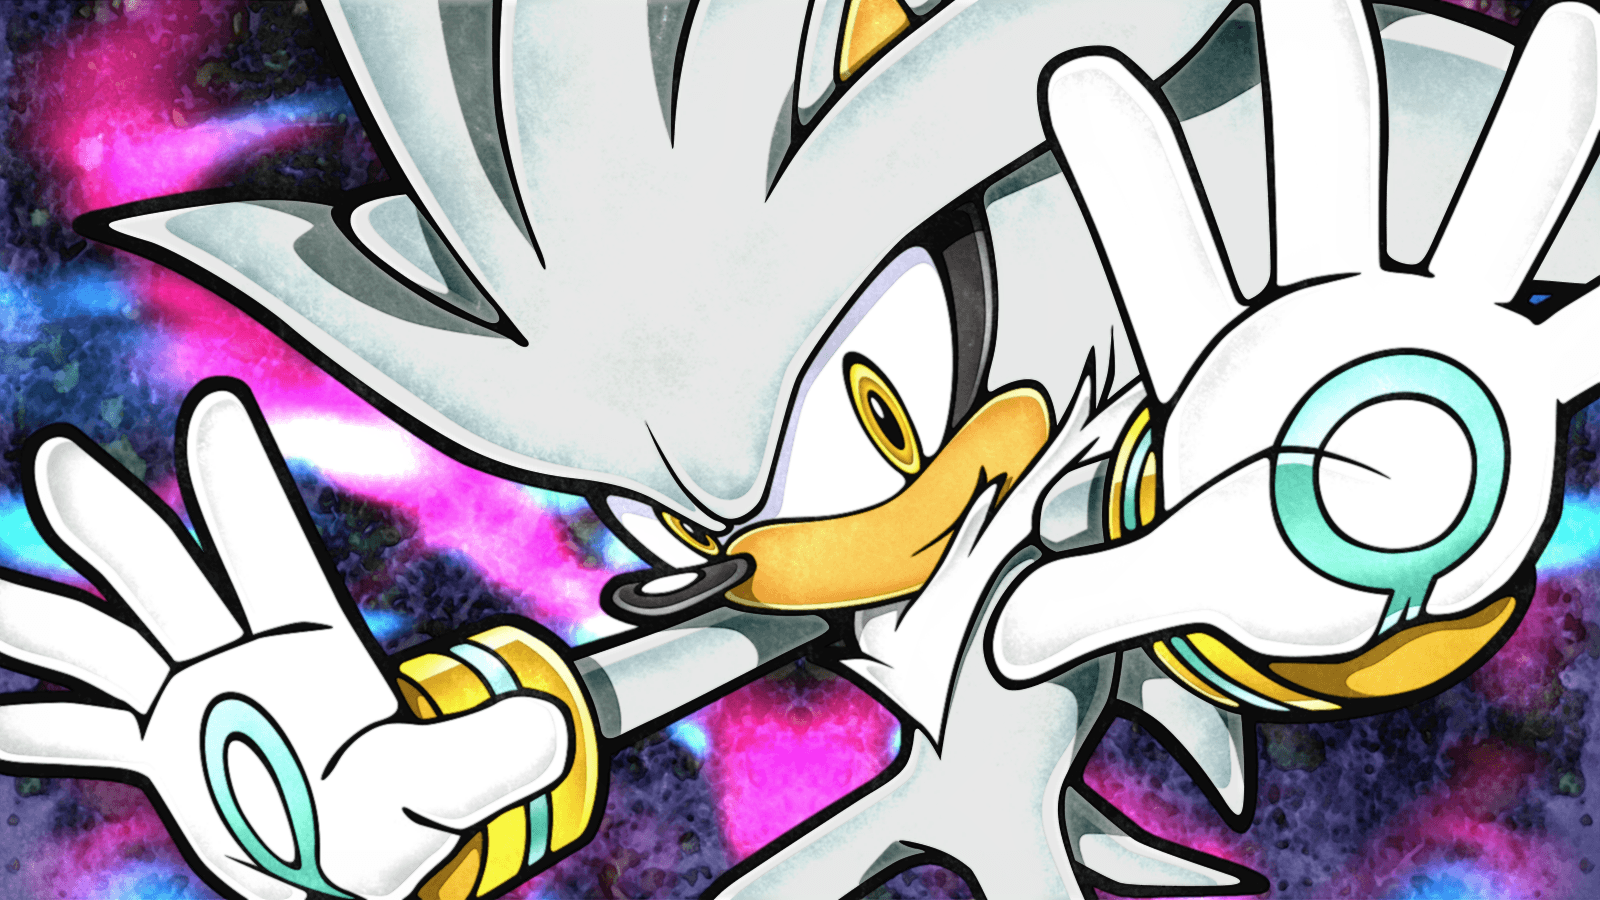 Silver The Hedgehog[11] By Light Rock